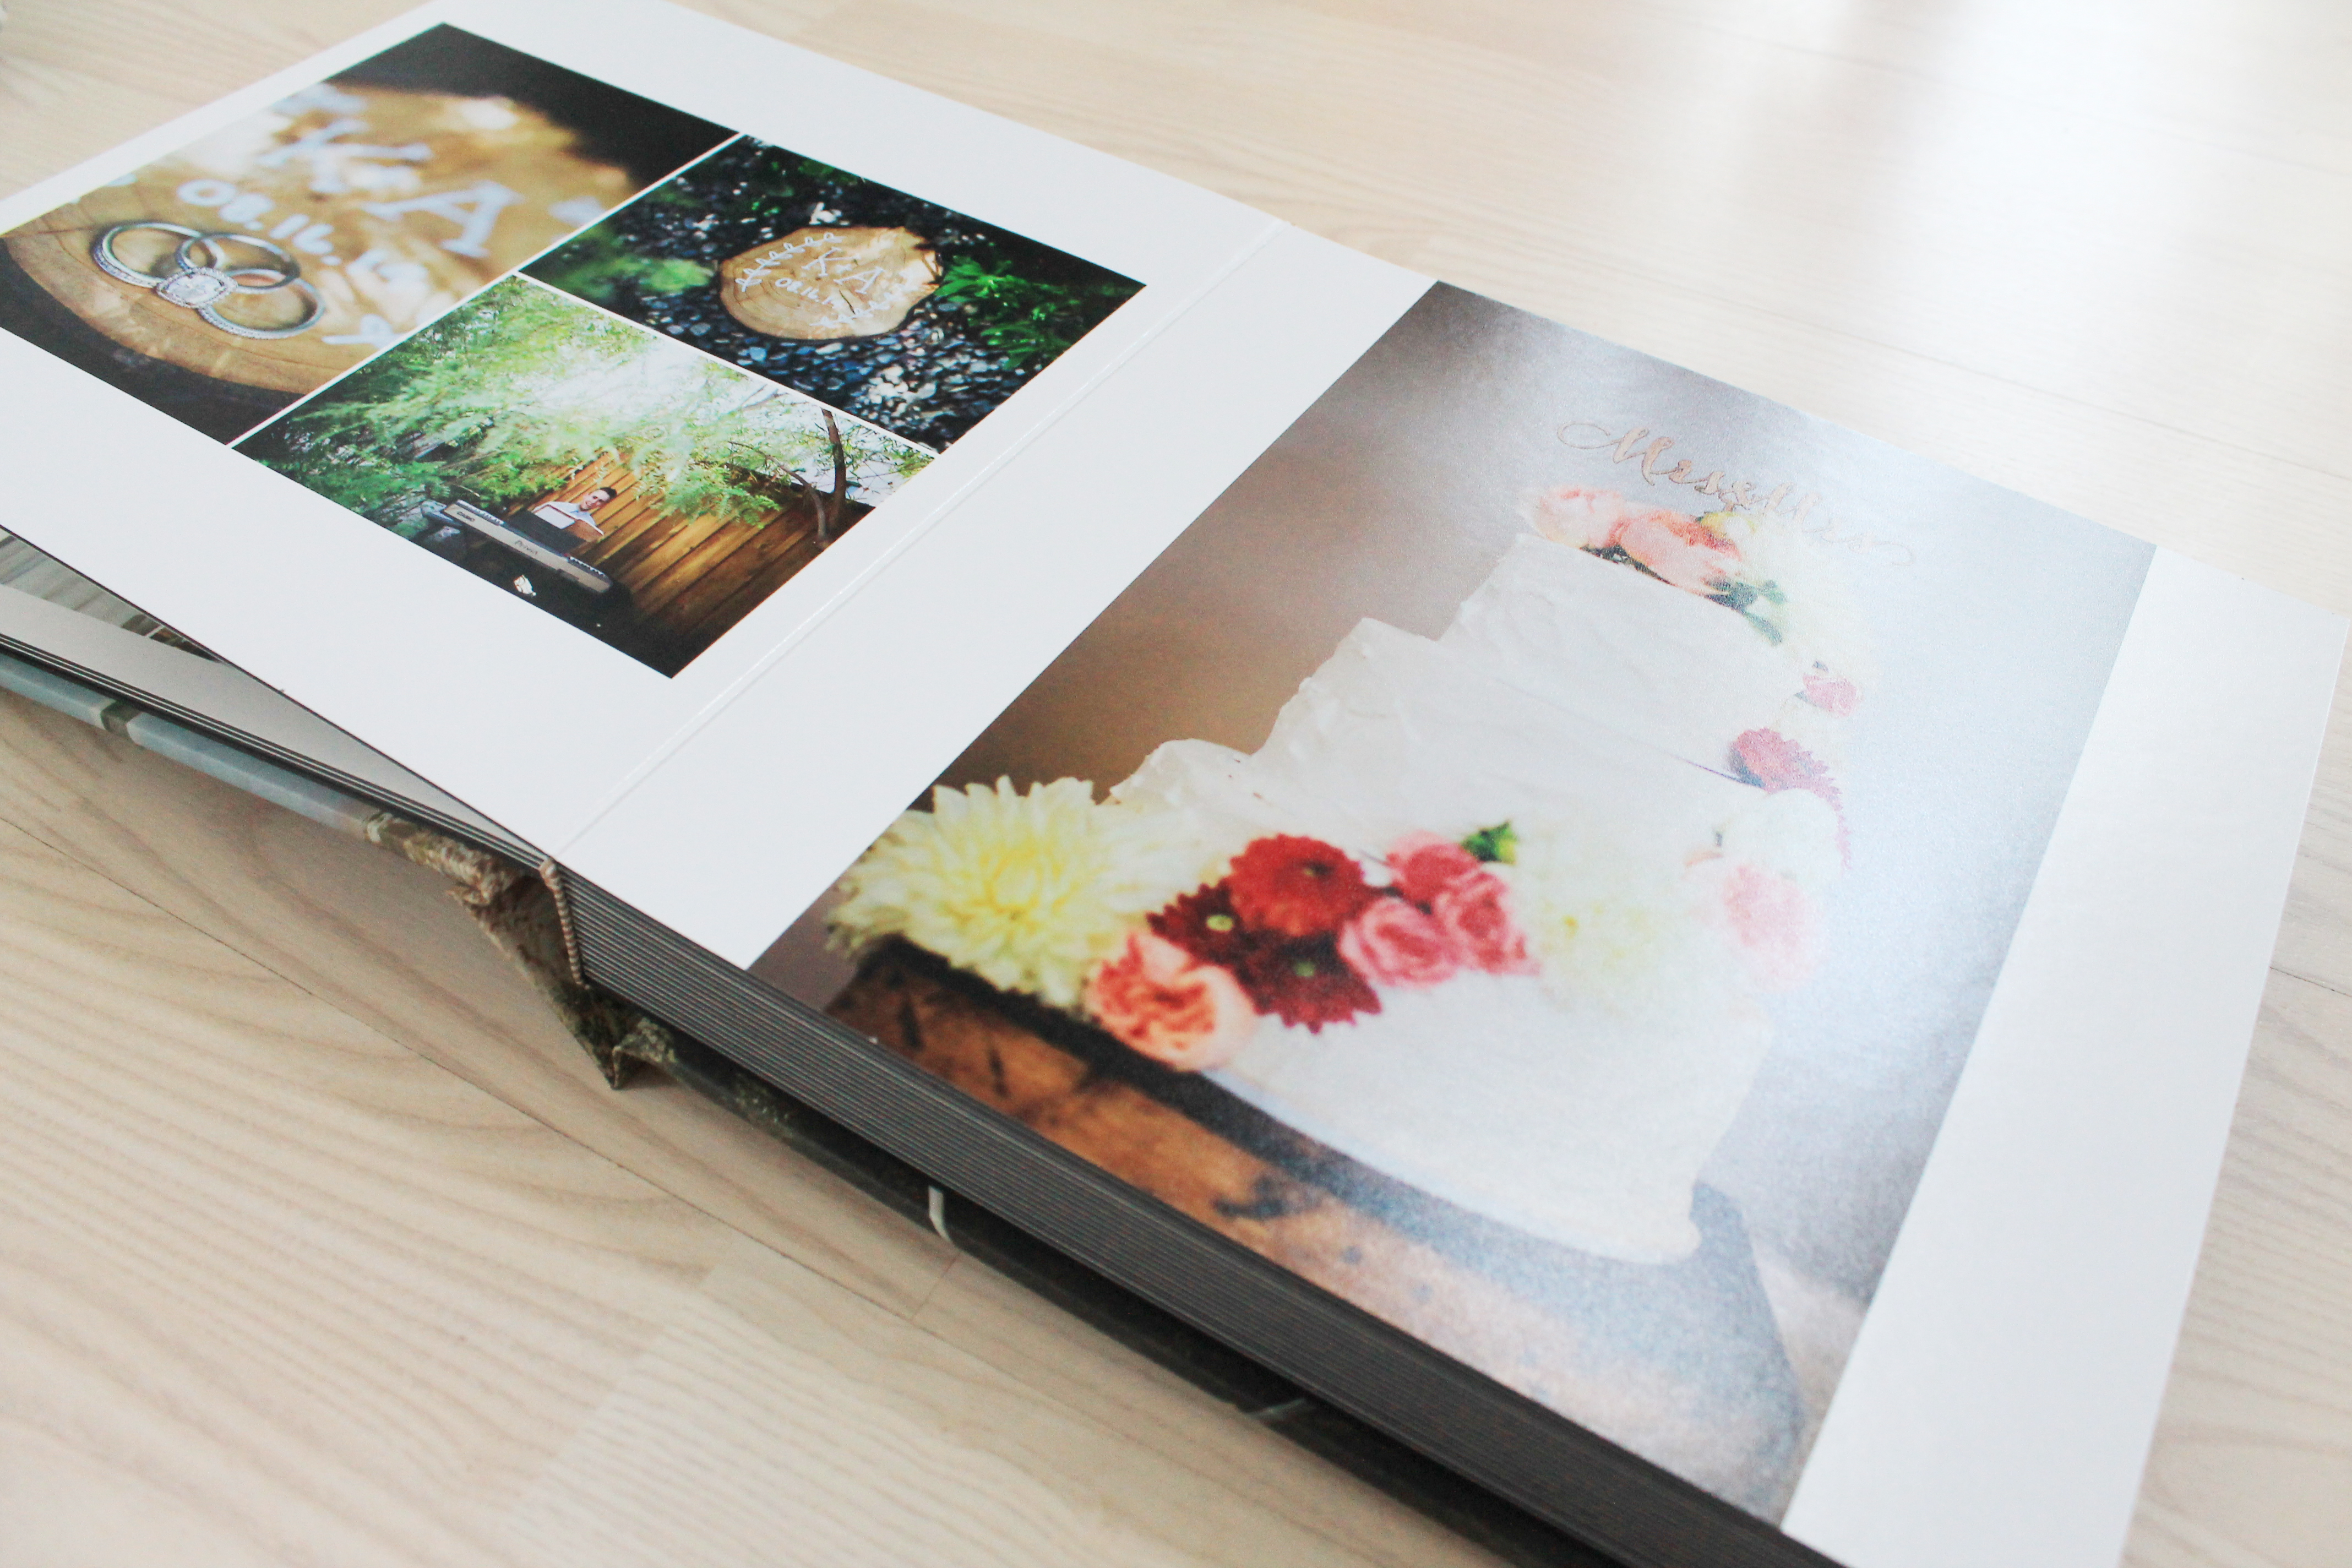 The High-Quality (Yet Affordable) Wedding Albums You've Been Waiting For